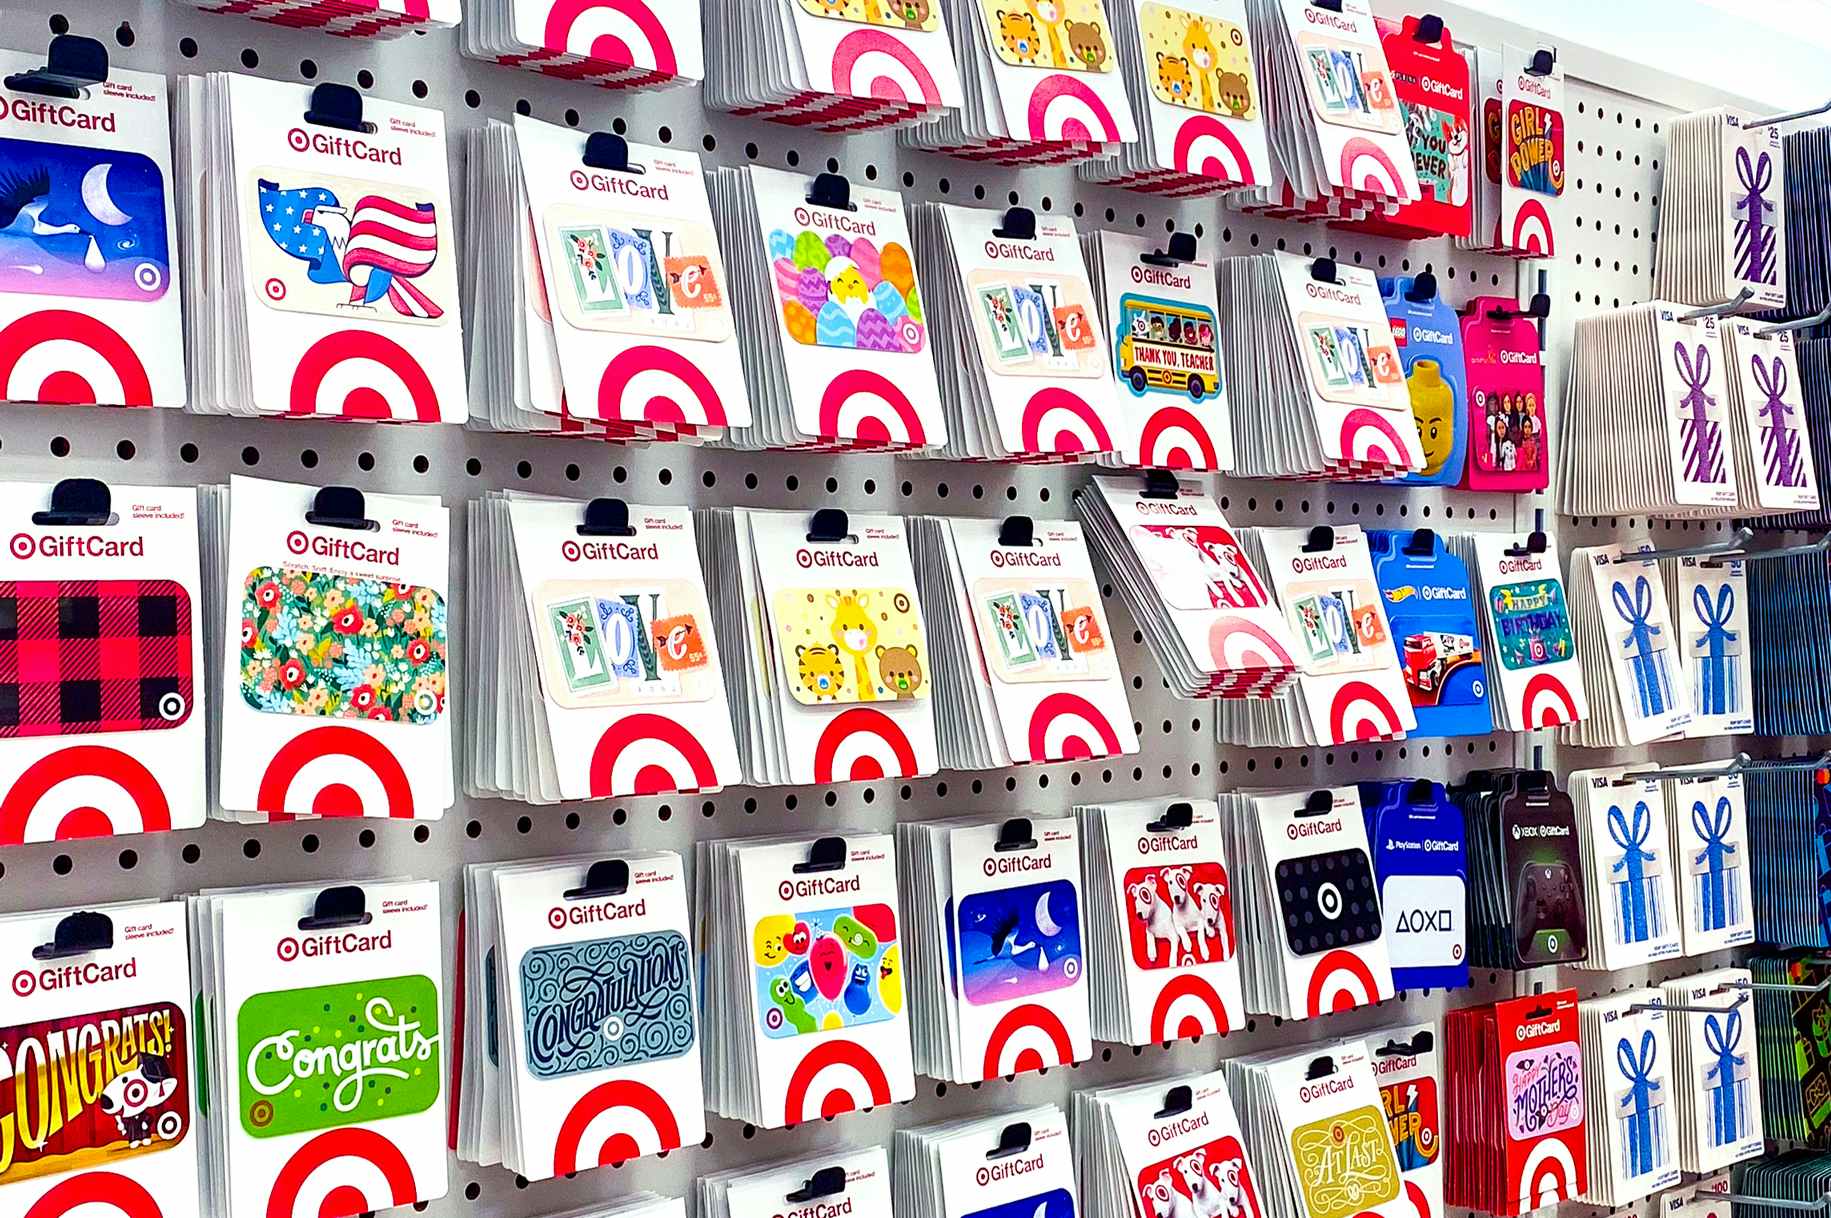 various themed target gift cards on display in store near shopping cart